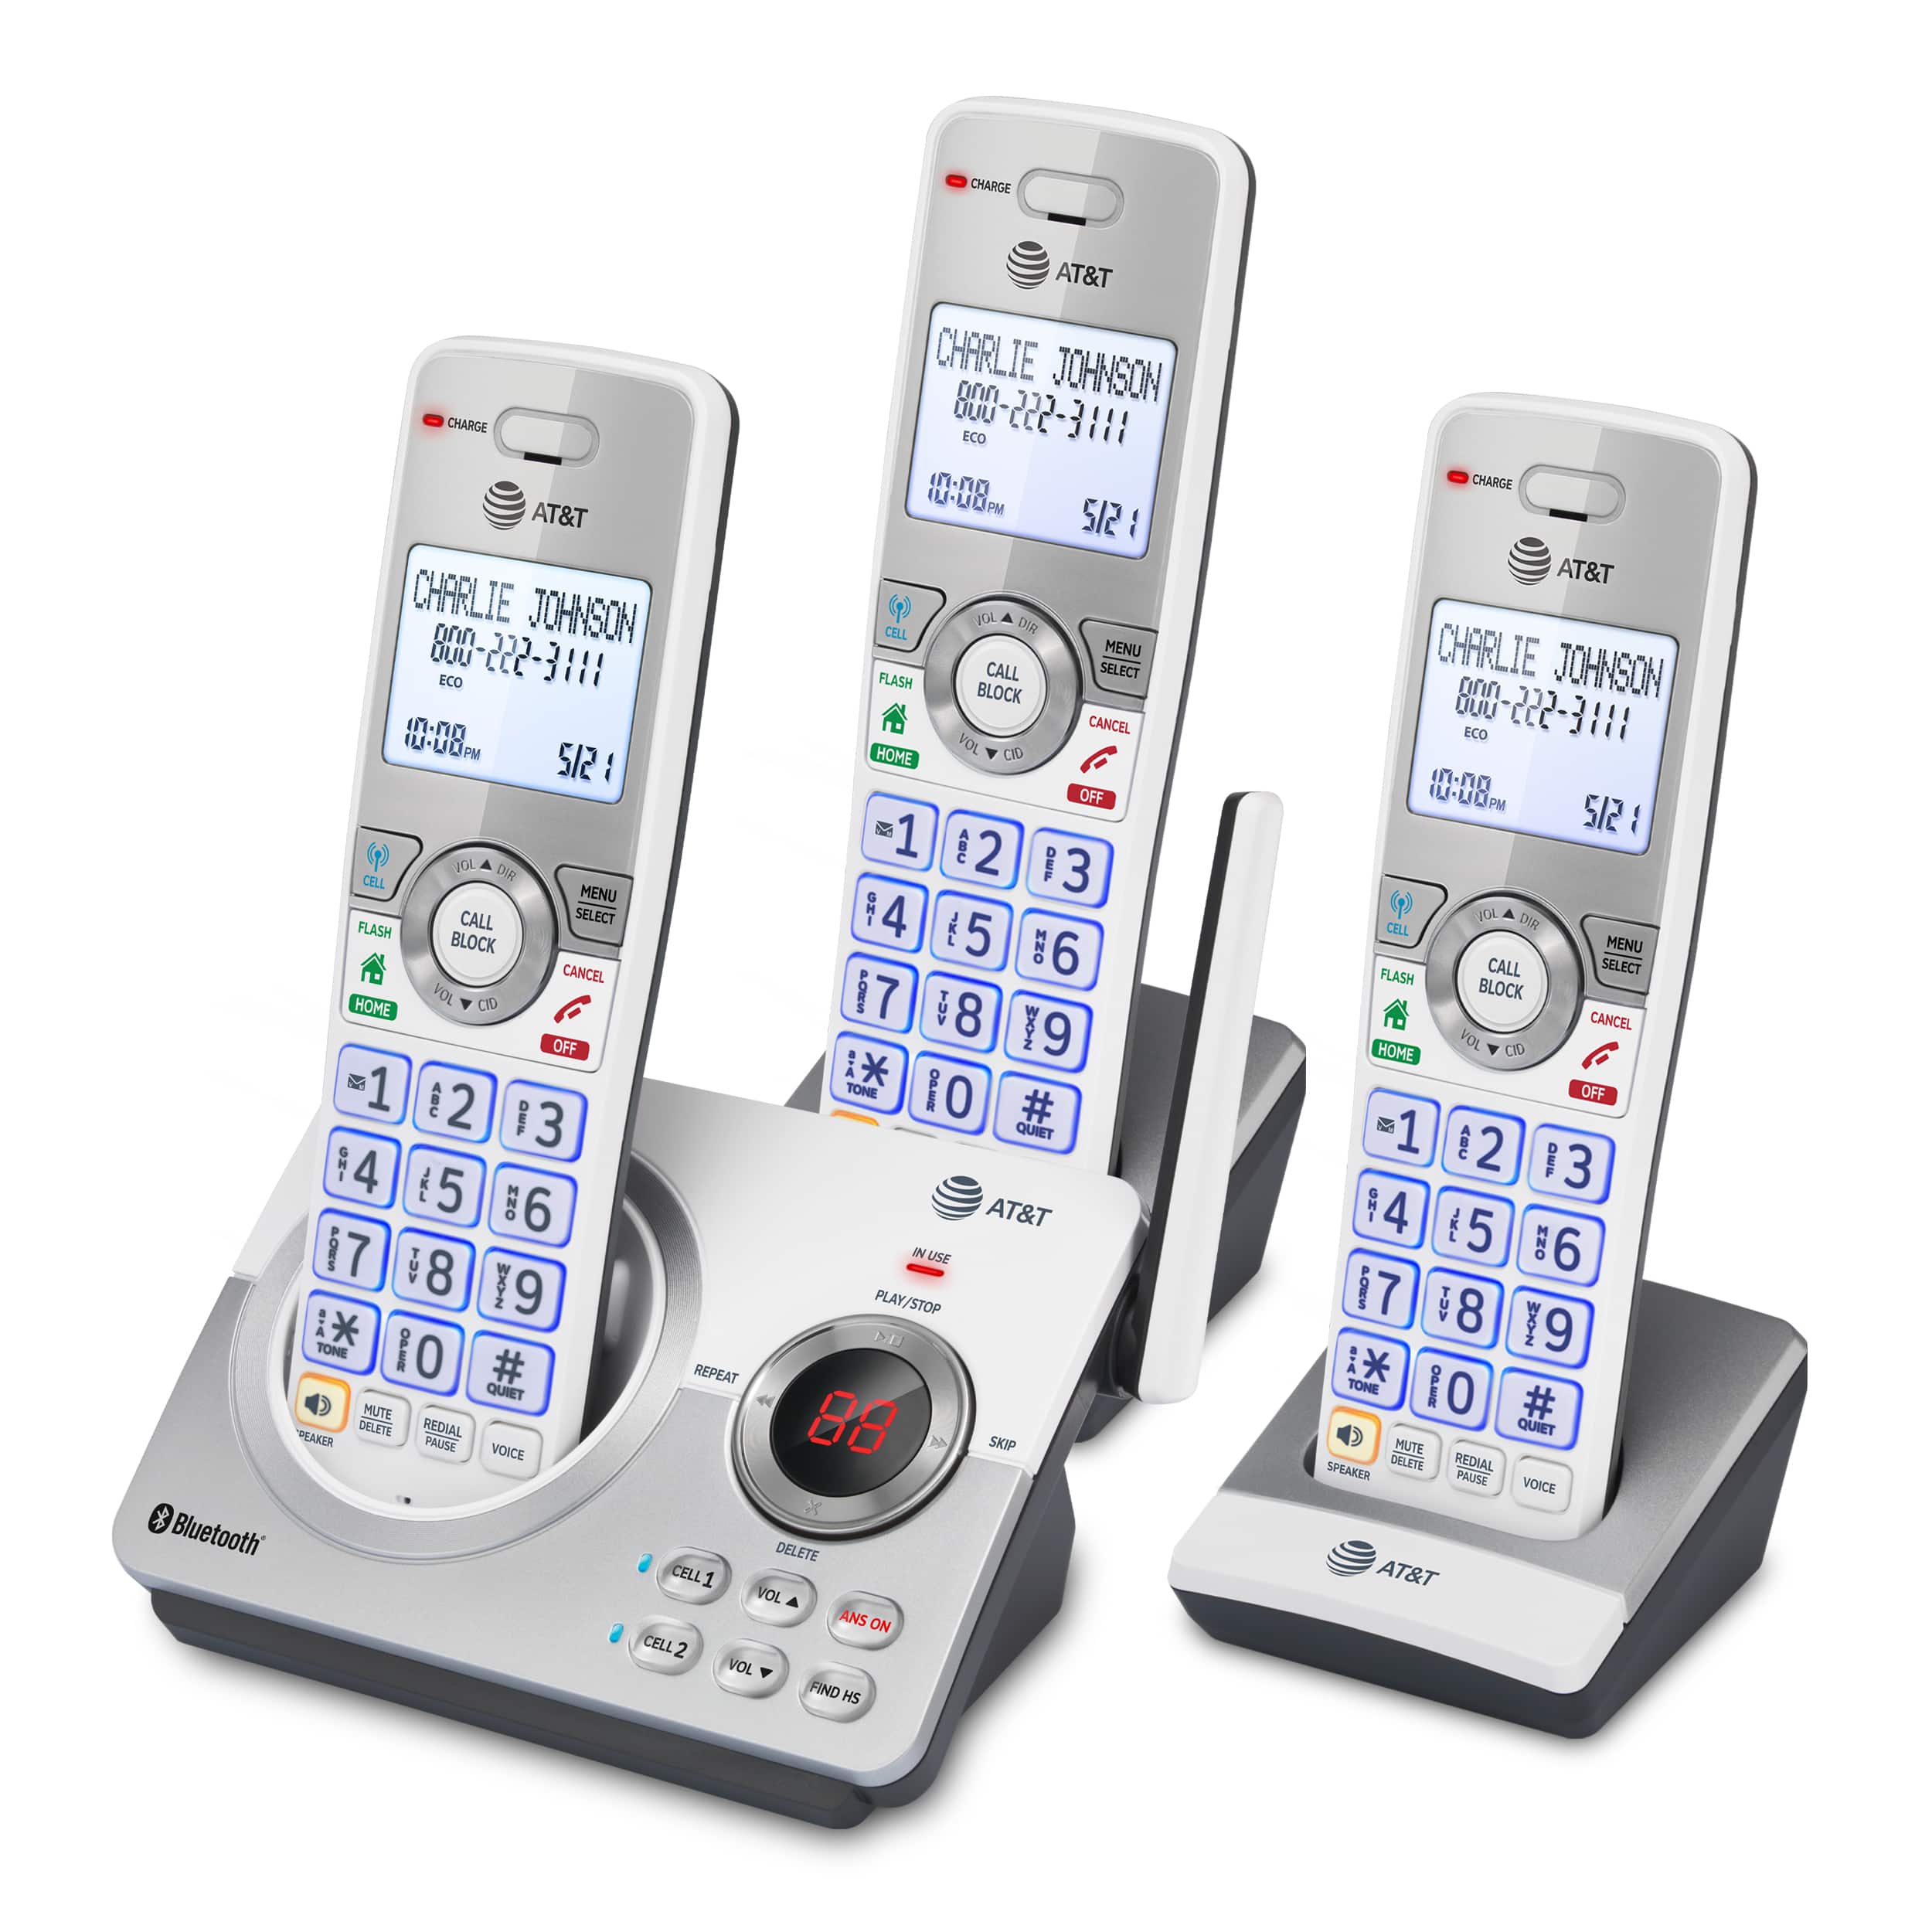 3-Handset Expandable Cordless Phone with Unsurpassed Range, Bluetooth Connect to Cell™, Smart Call Blocker and Answering System - view 2